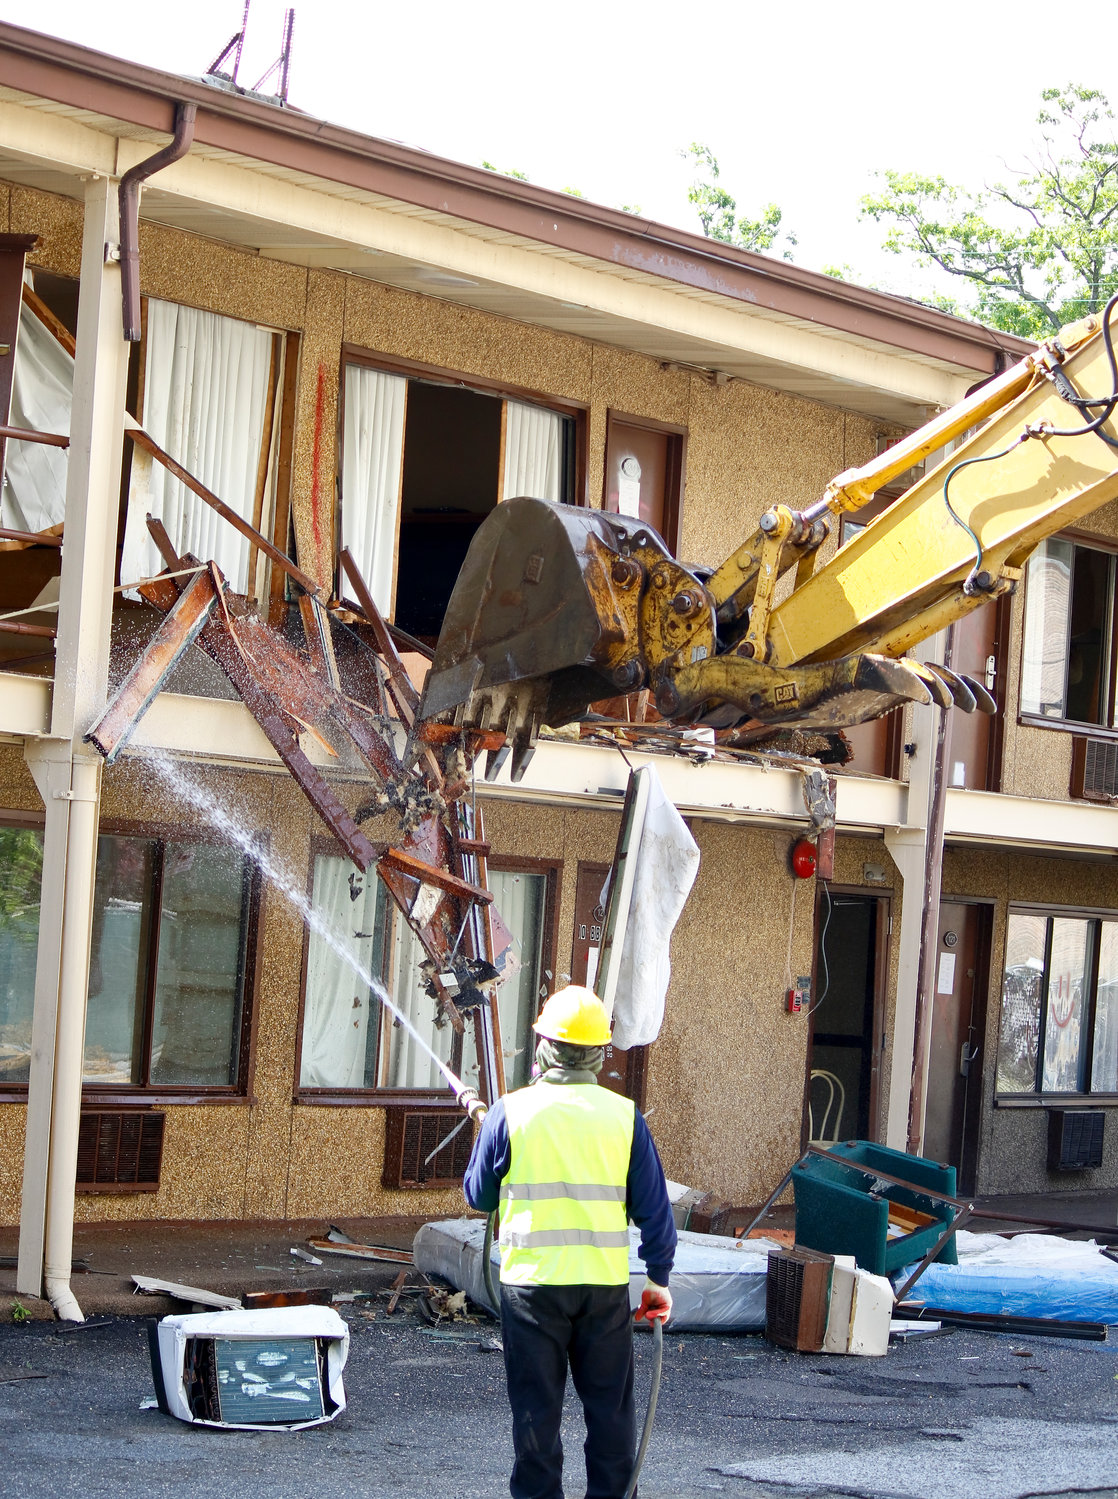 Terwilliger & Bartone Properties started tearing down the Capri motel on Monday, above left, after coronavirus restrictions on construction were lifted.